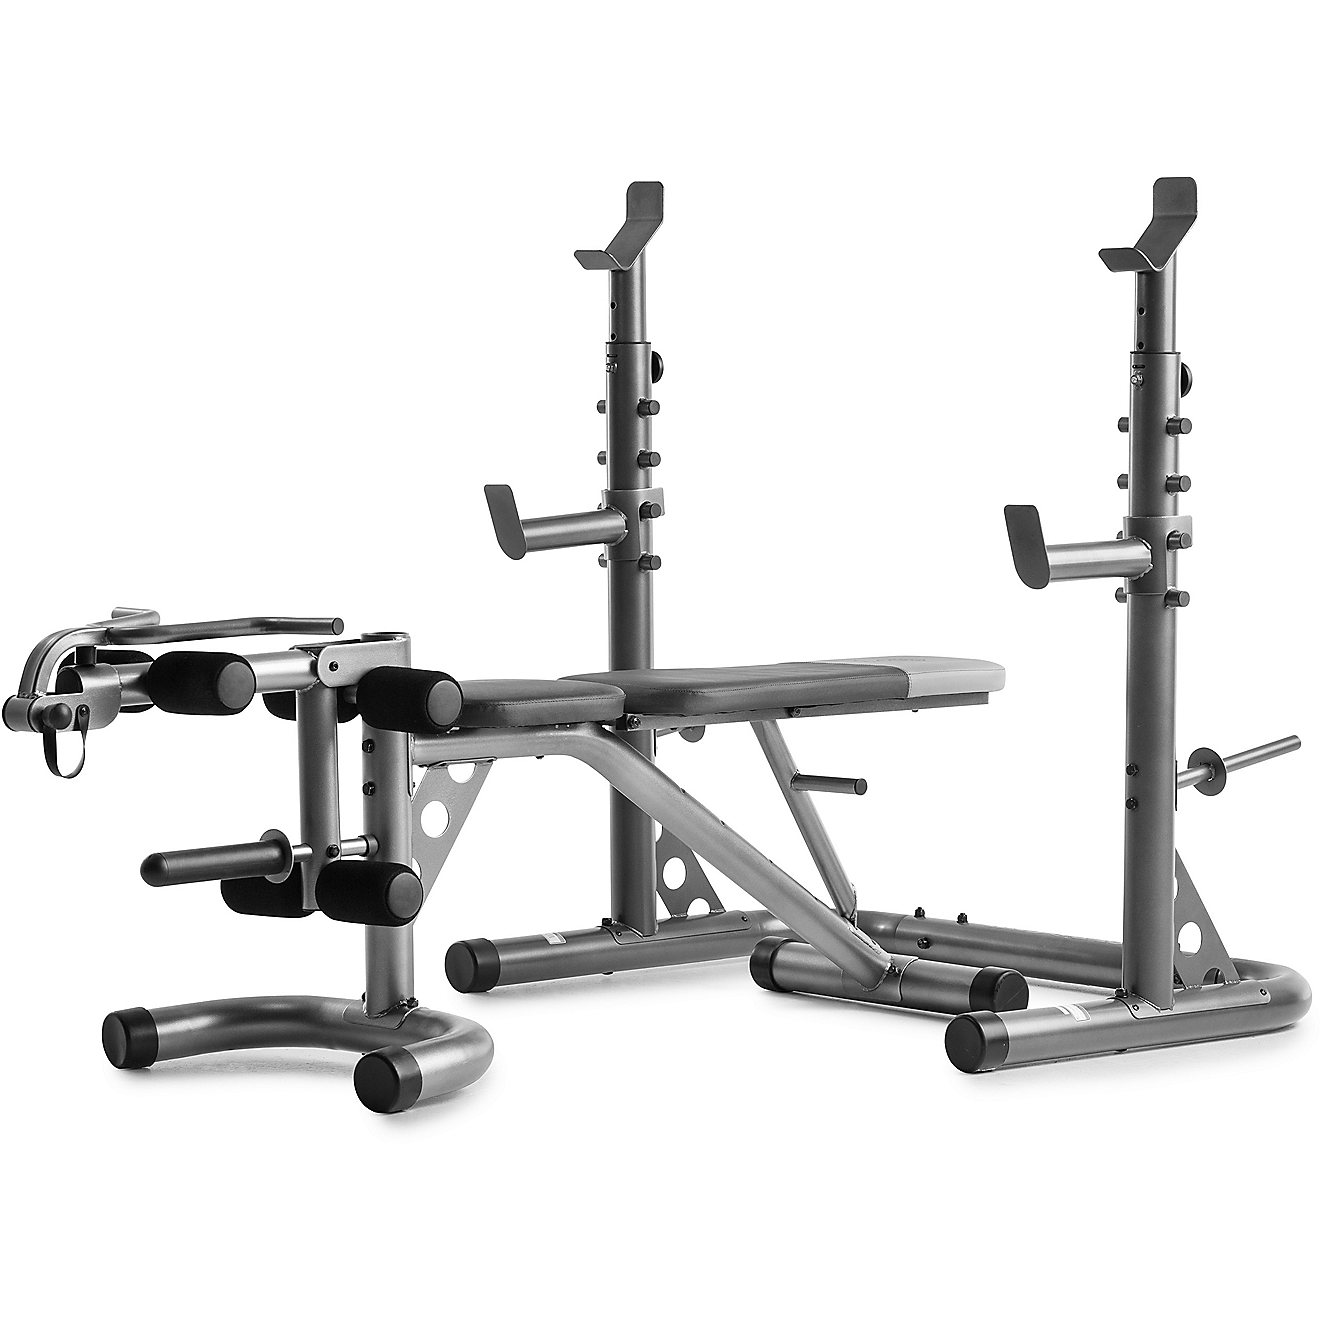 Weider XRS 20 Olympic Workout Bench WEBE1486 for sale online 